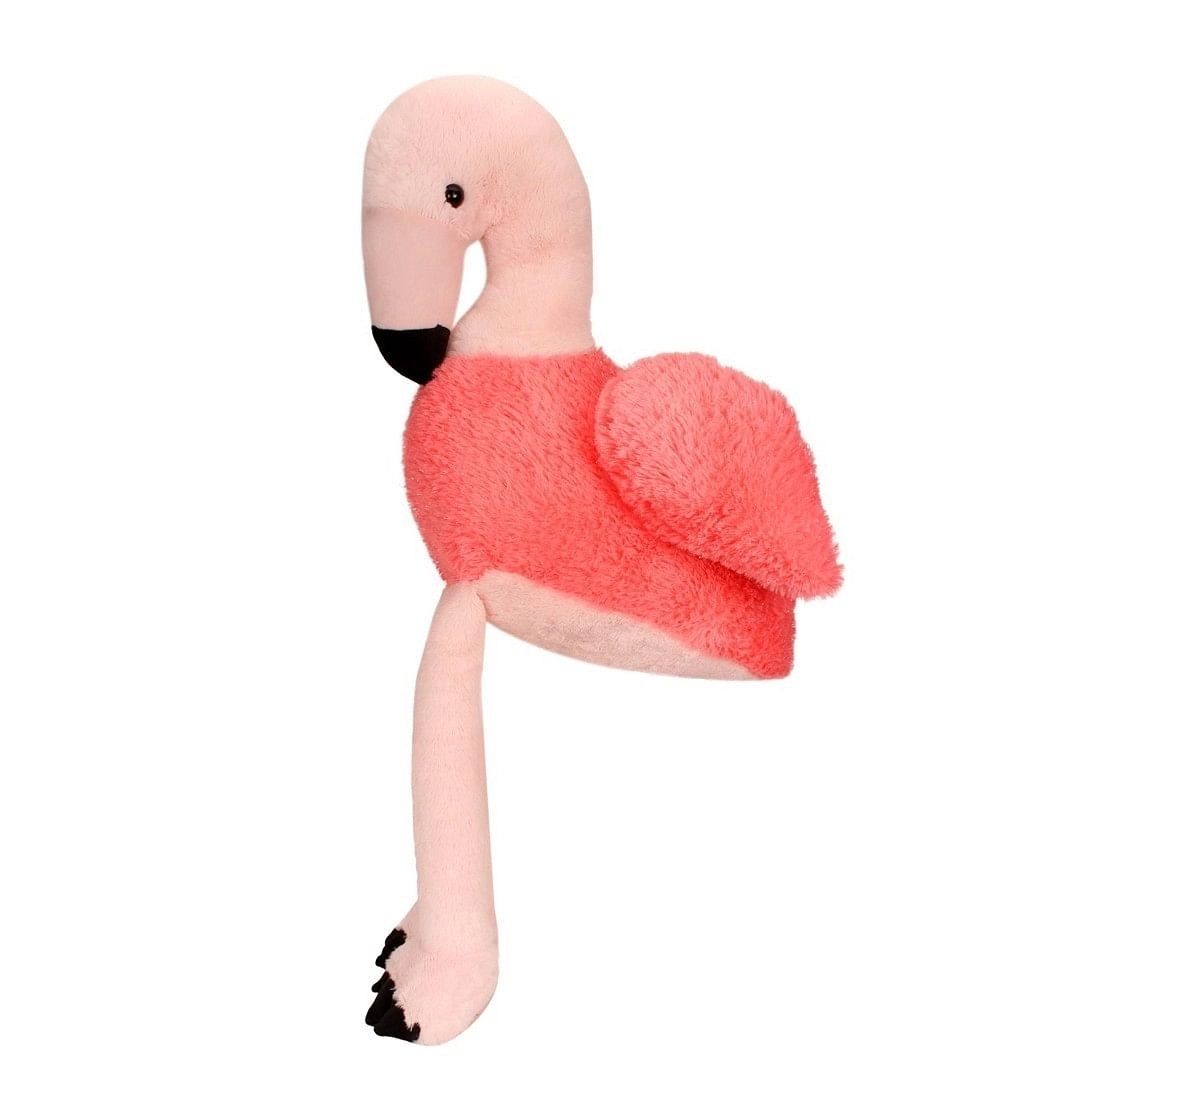 Fuzzbuzz Watermelon Red Flamingo - 56Cm Quirky Soft Toys for Kids age 0M+ - 56 Cm (Red)